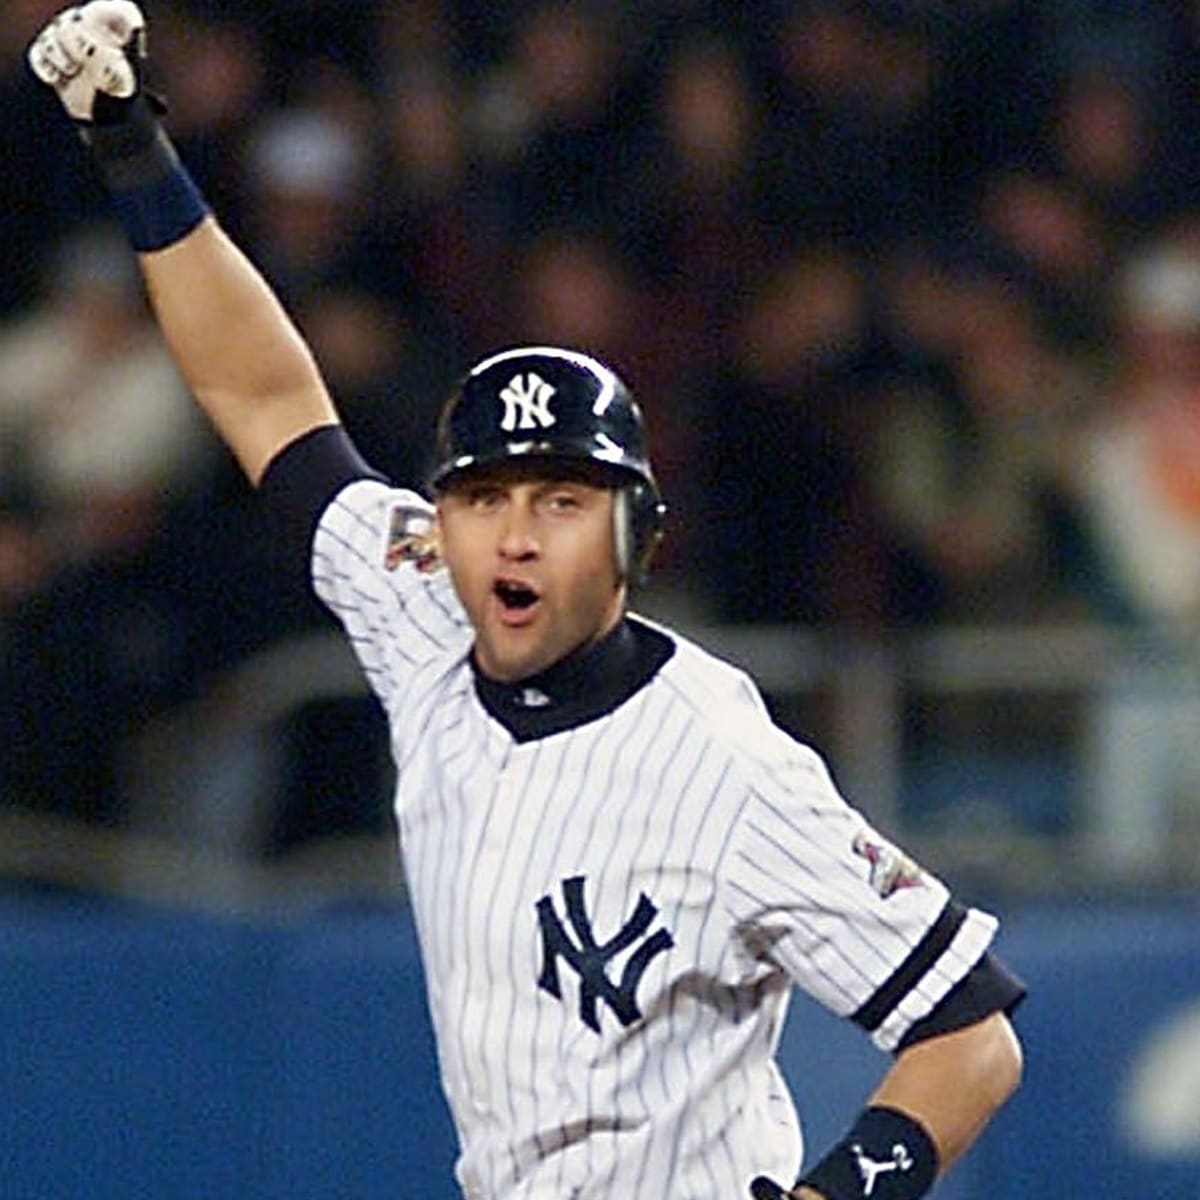 Derek Jeter becomes Mr. November with walk-off home run - Sports Illustrated